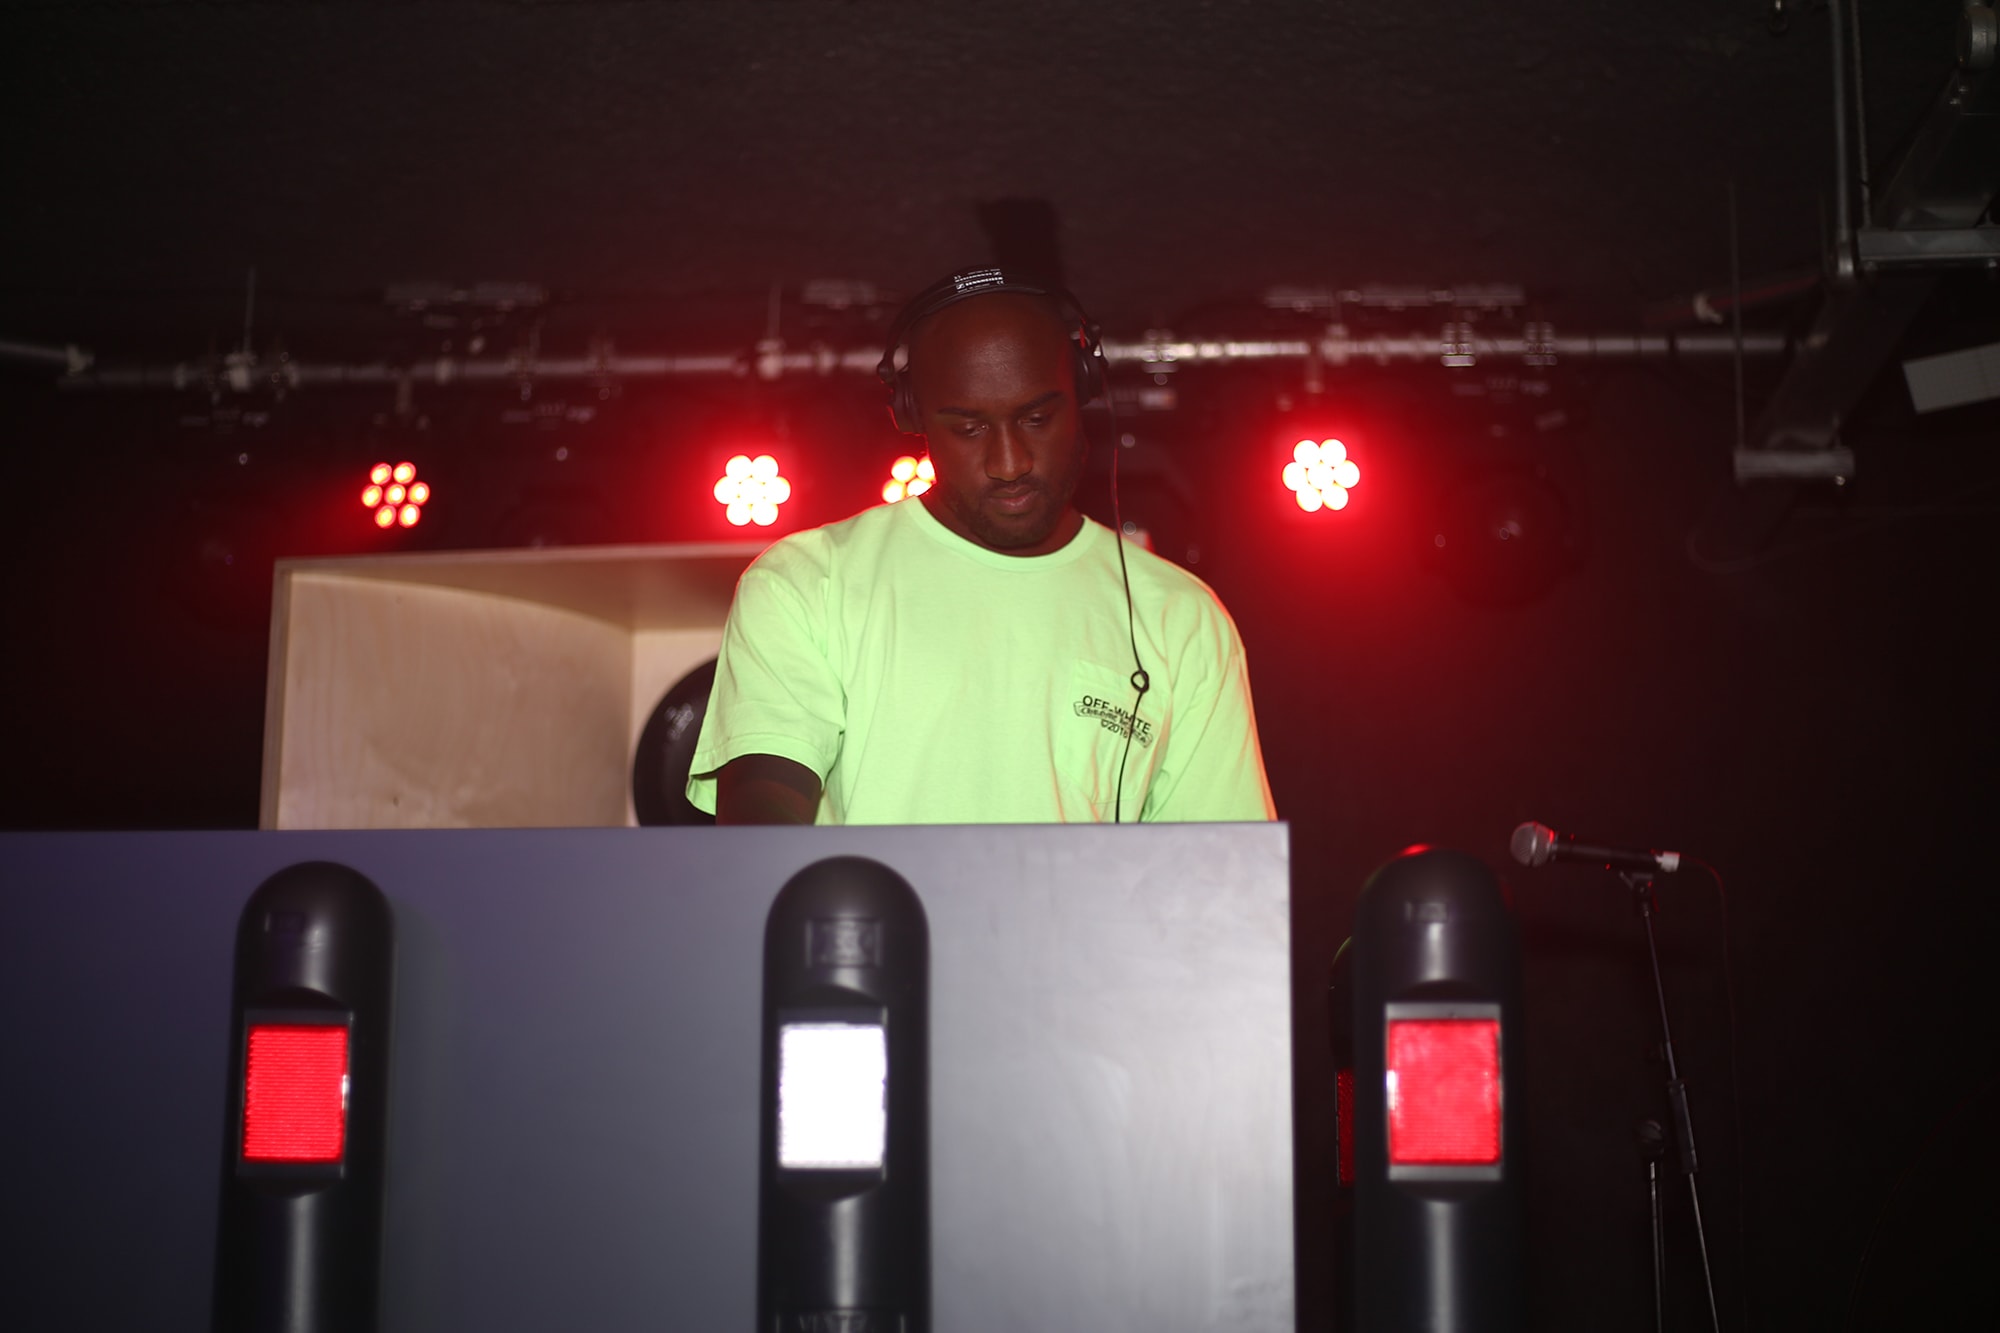 OFF-WHITE and Matchesfashion.com Party with Virgil Abloh